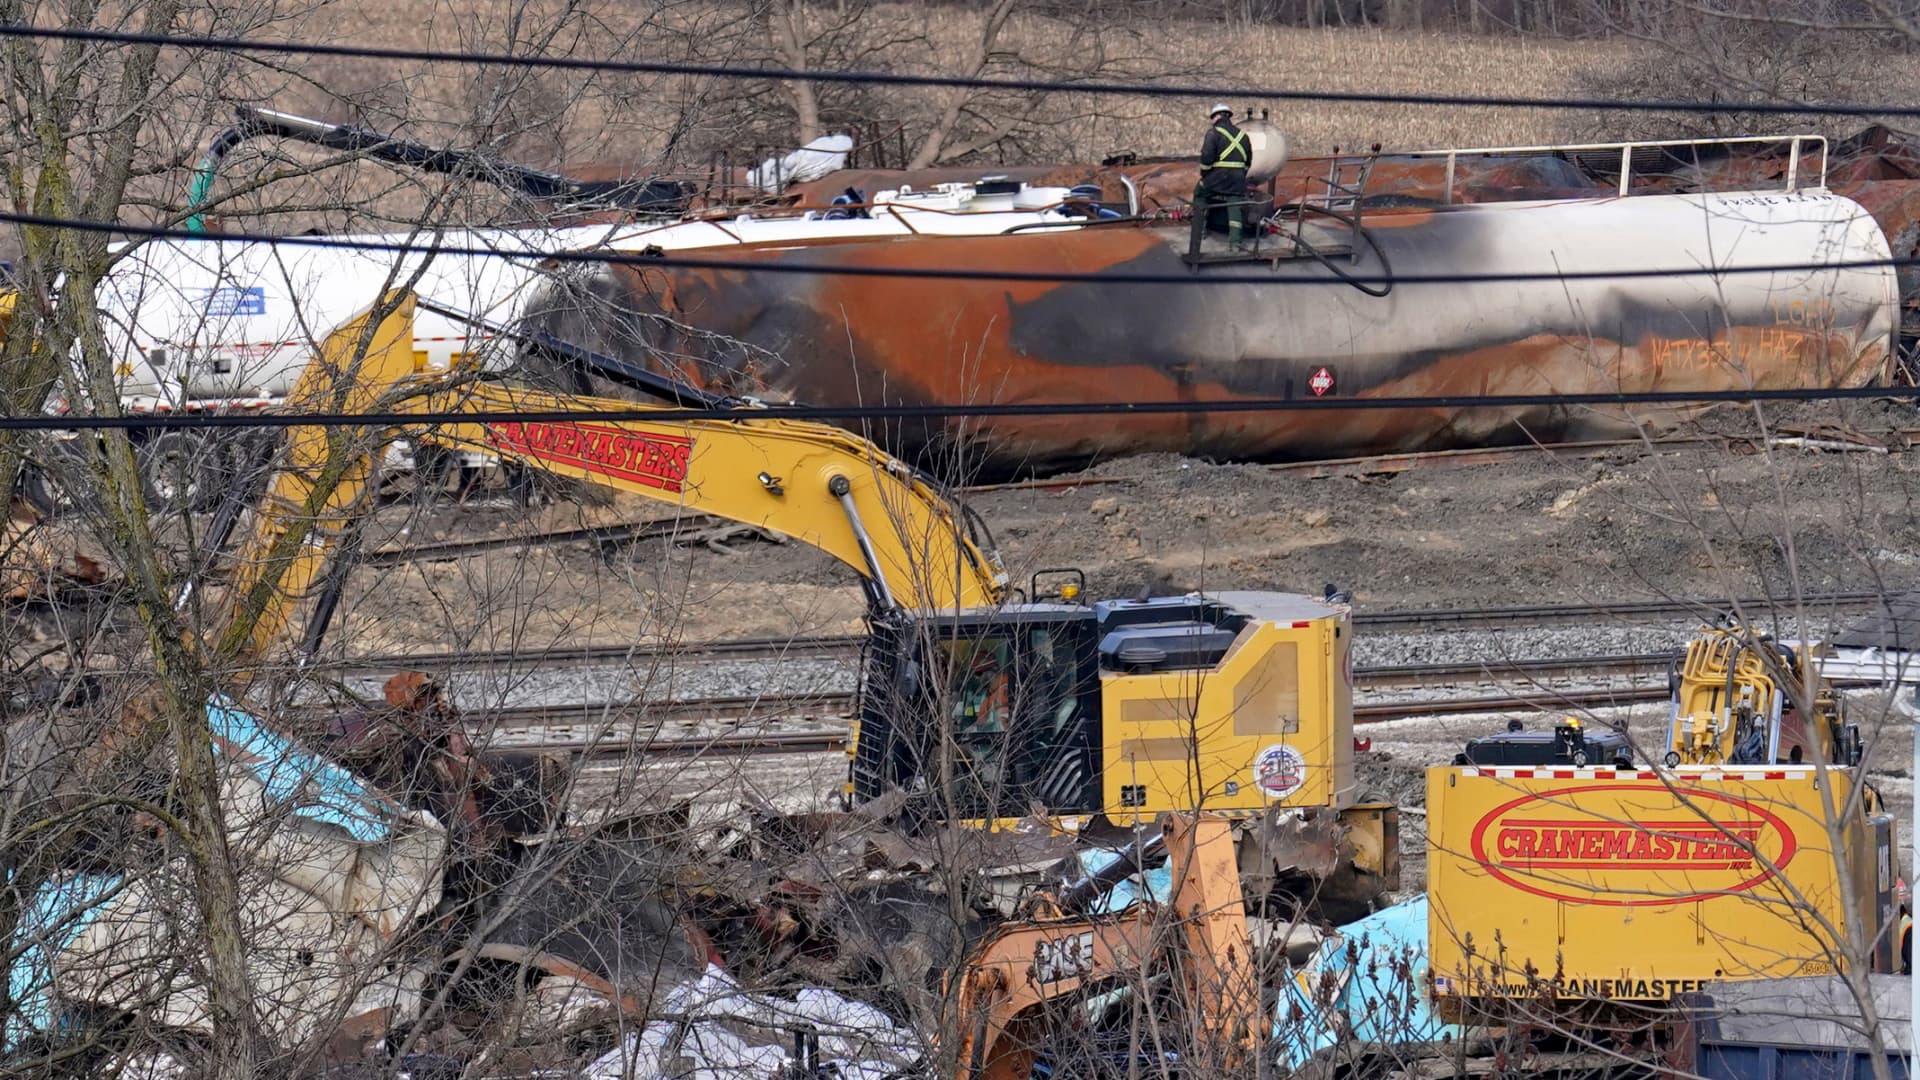 Workers continue to clean up remaining tank cars, Tuesday, Feb. 21, 2023, in East Palestine, Ohio, following the Feb. 3 Norfolk Southern freight train derailment.